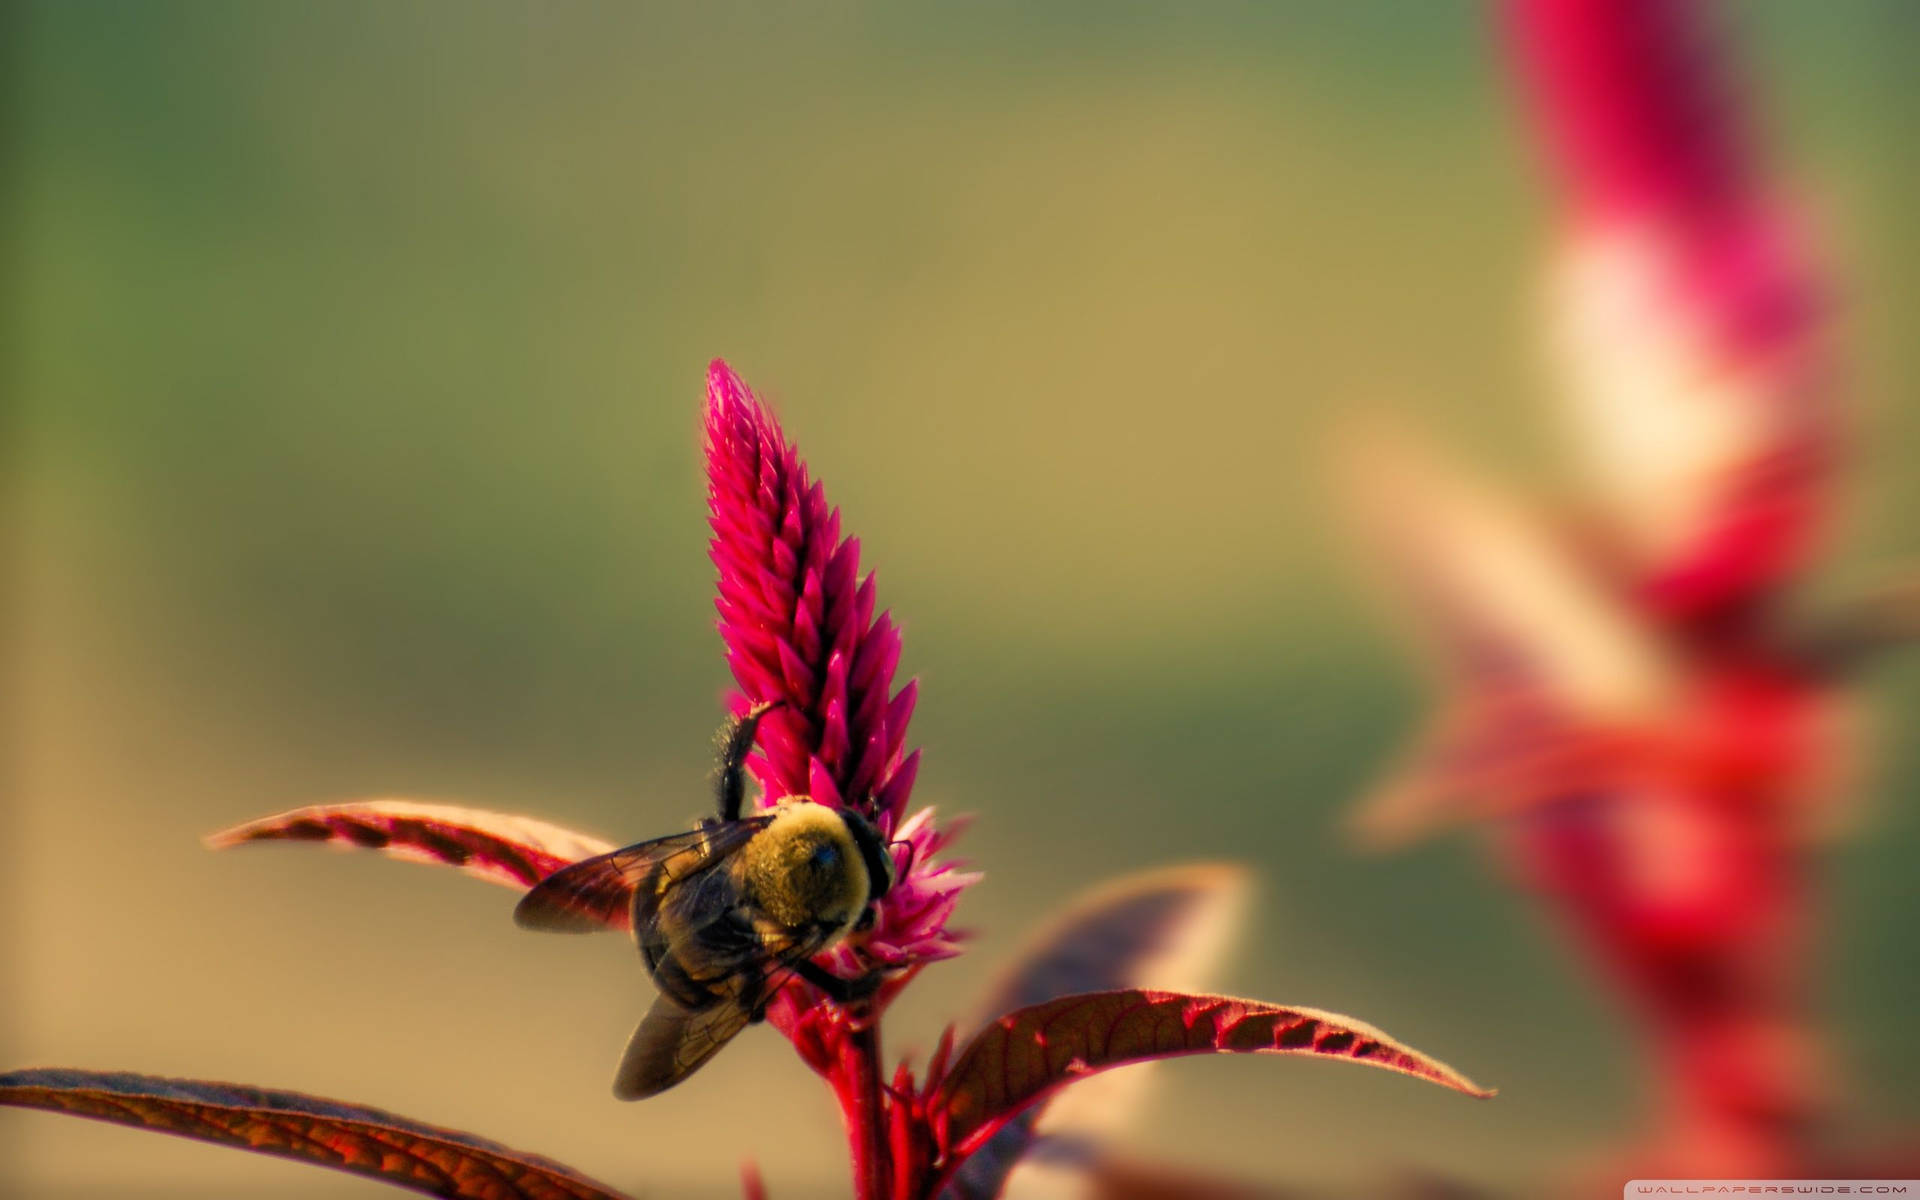 Insect Bumblebee On Red Flower Background